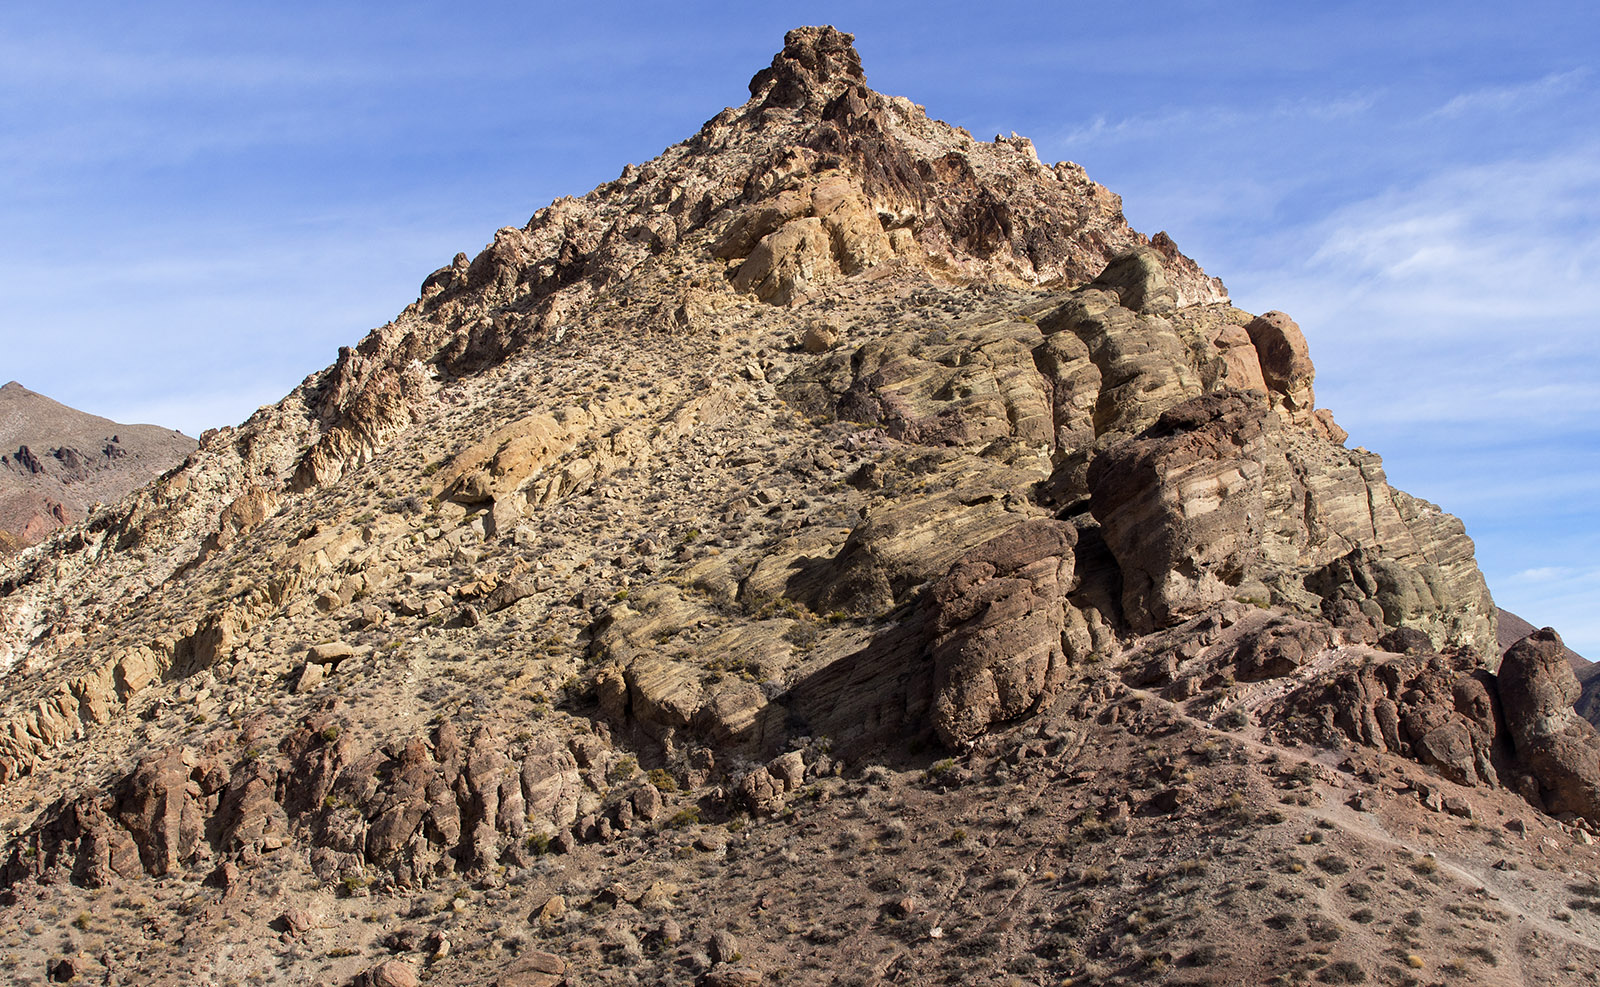 Detail of peak at Red Pass showing slanted strata of Titus Canyon Formation with shale and  sandstone topped by volcanic rock.